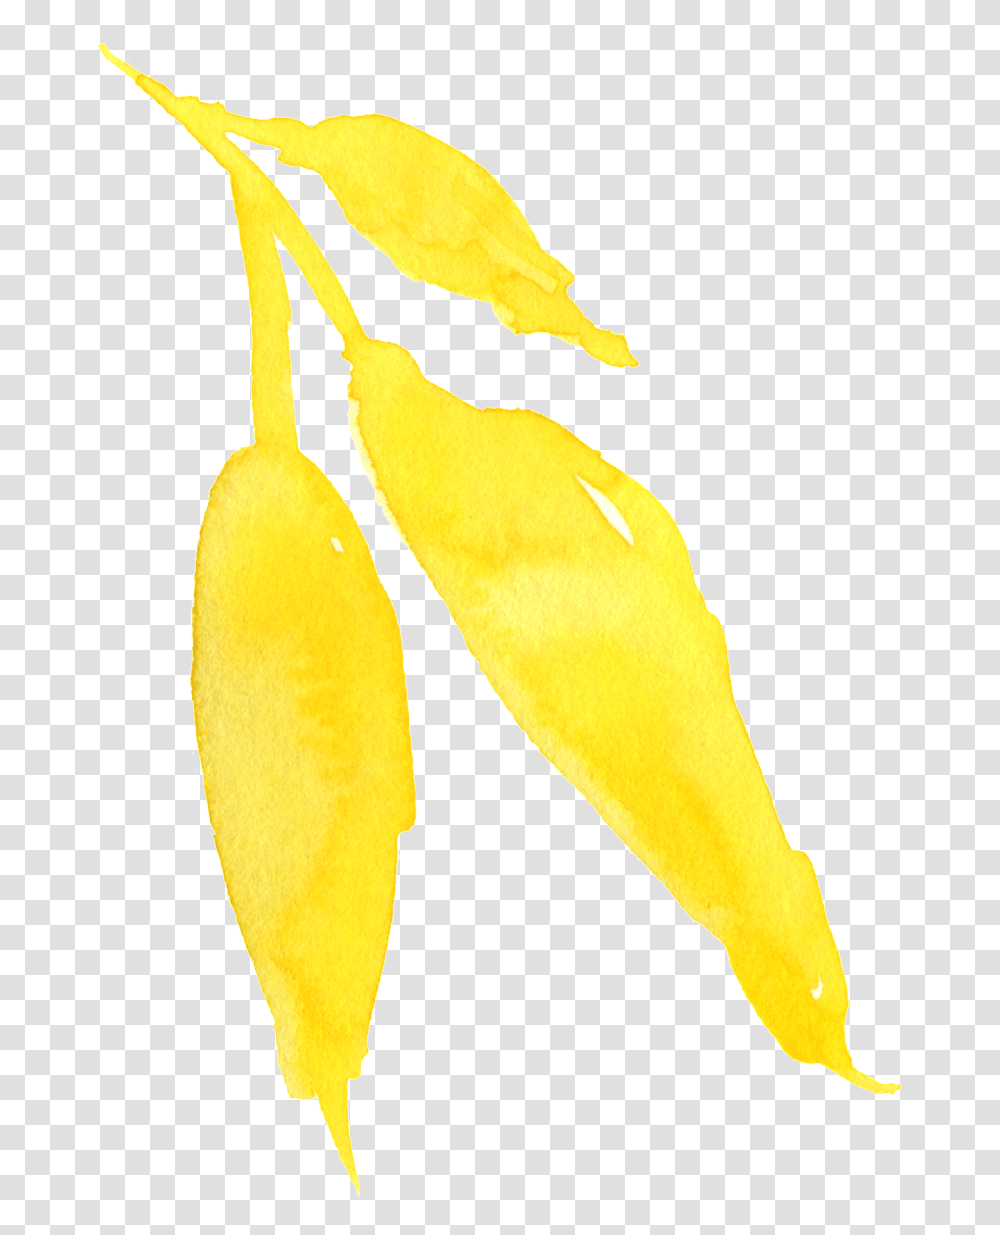 Download Hd This Graphics Is Watercolor Yellow Flower Hop Hornbeam, Plant, Bird, Animal, Fruit Transparent Png